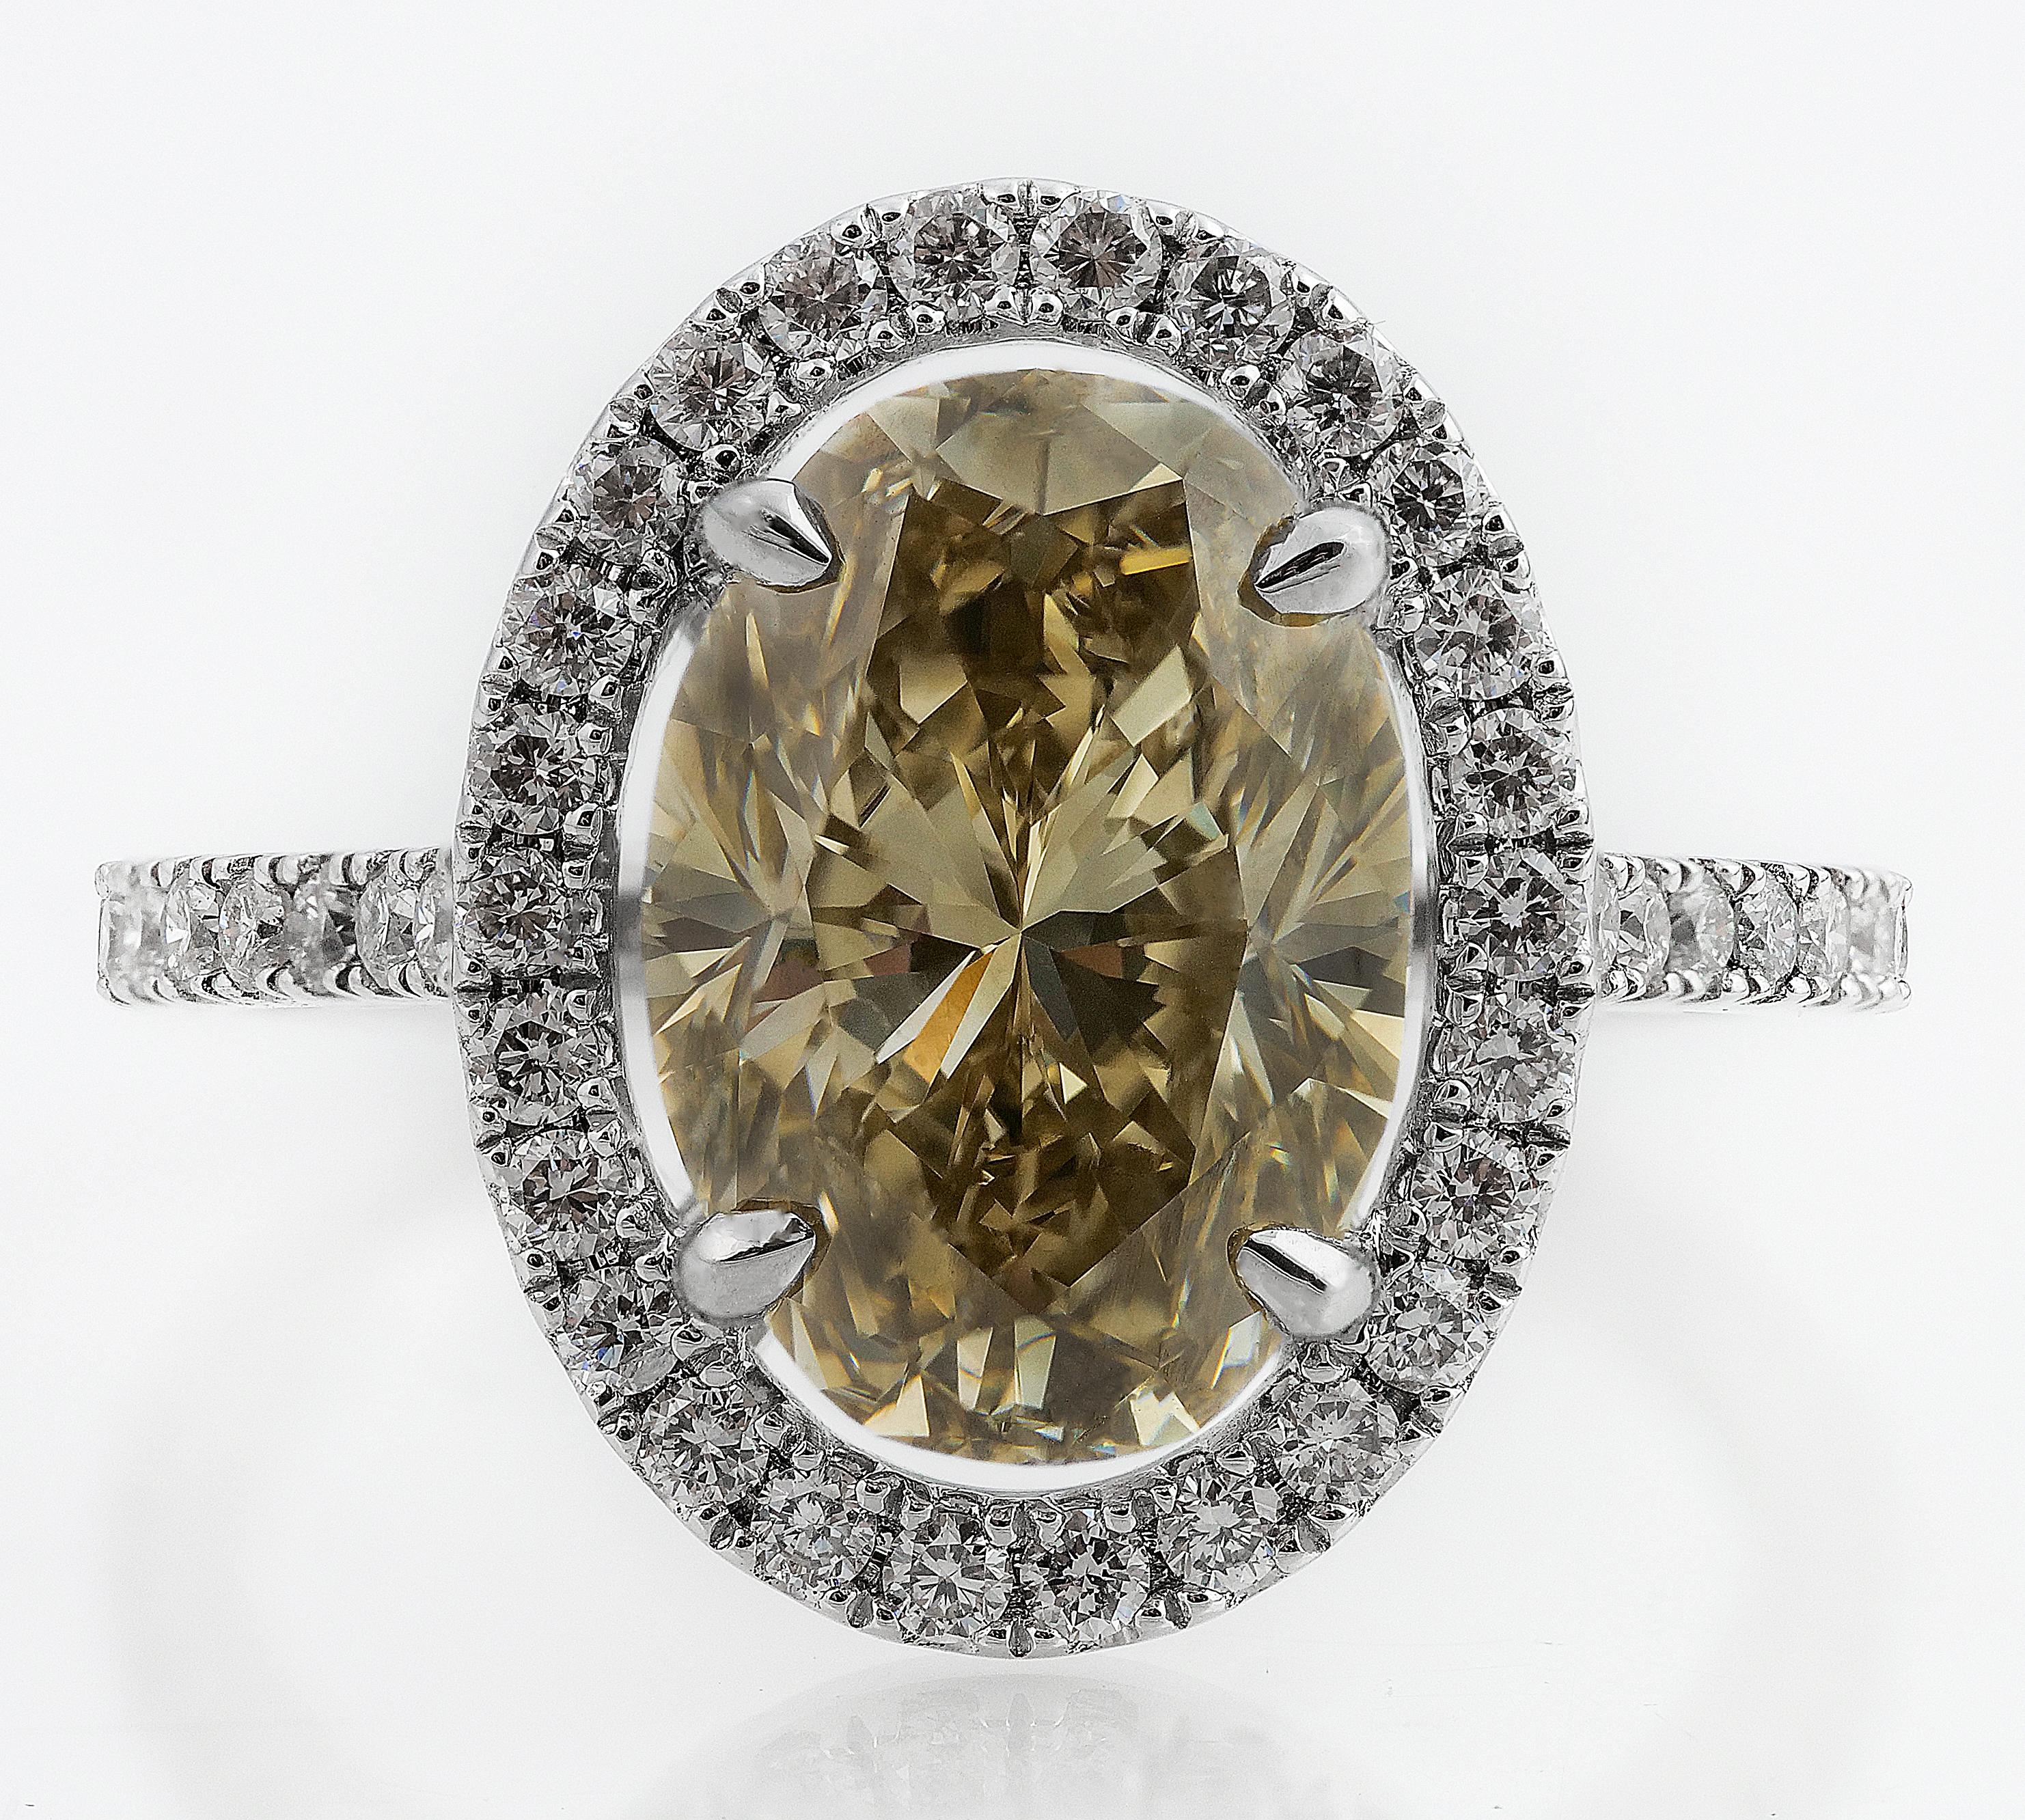 Statement ring consisting of a fancy brownish greenish-yellow colour, natural untreated diamond center and surrounded by glistening round brilliant cut diamonds and diamond shoulders, set on an 18 ct white gold. The beautiful contrast between the